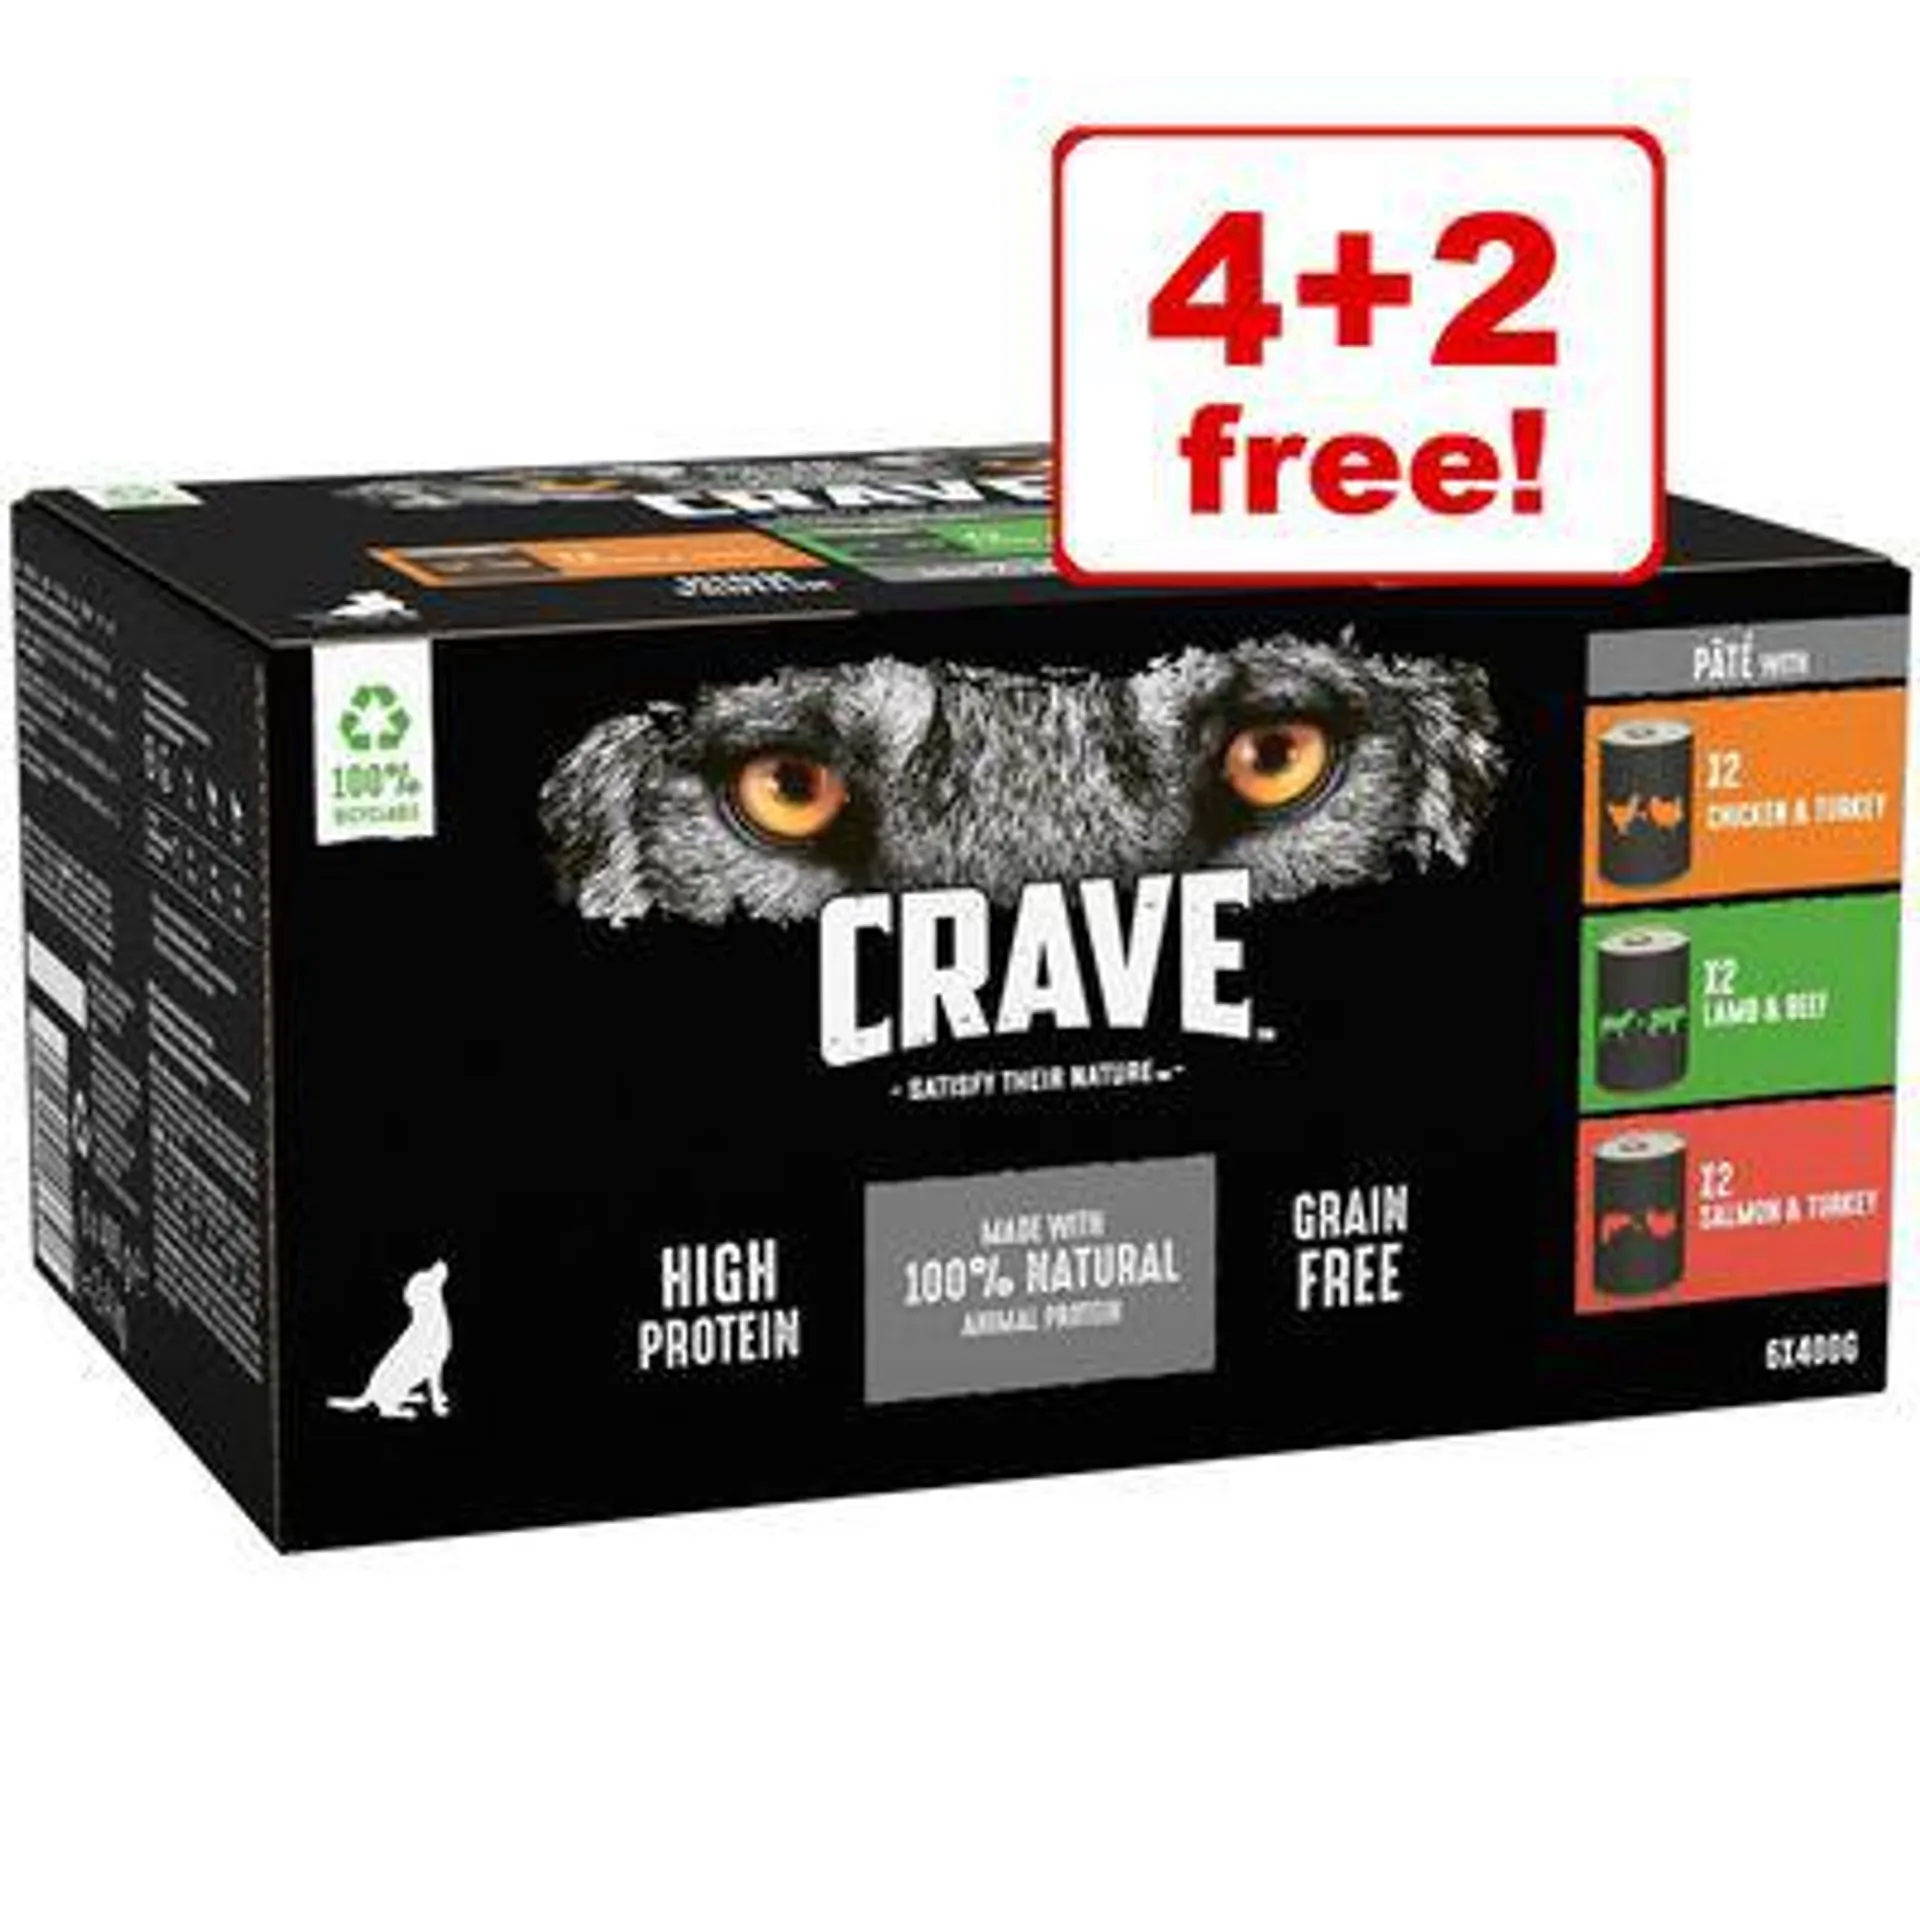 6 x 400g CRAVE Adult Pate Mixed Pack Wet Dog Food - 4 + 2 Free! *